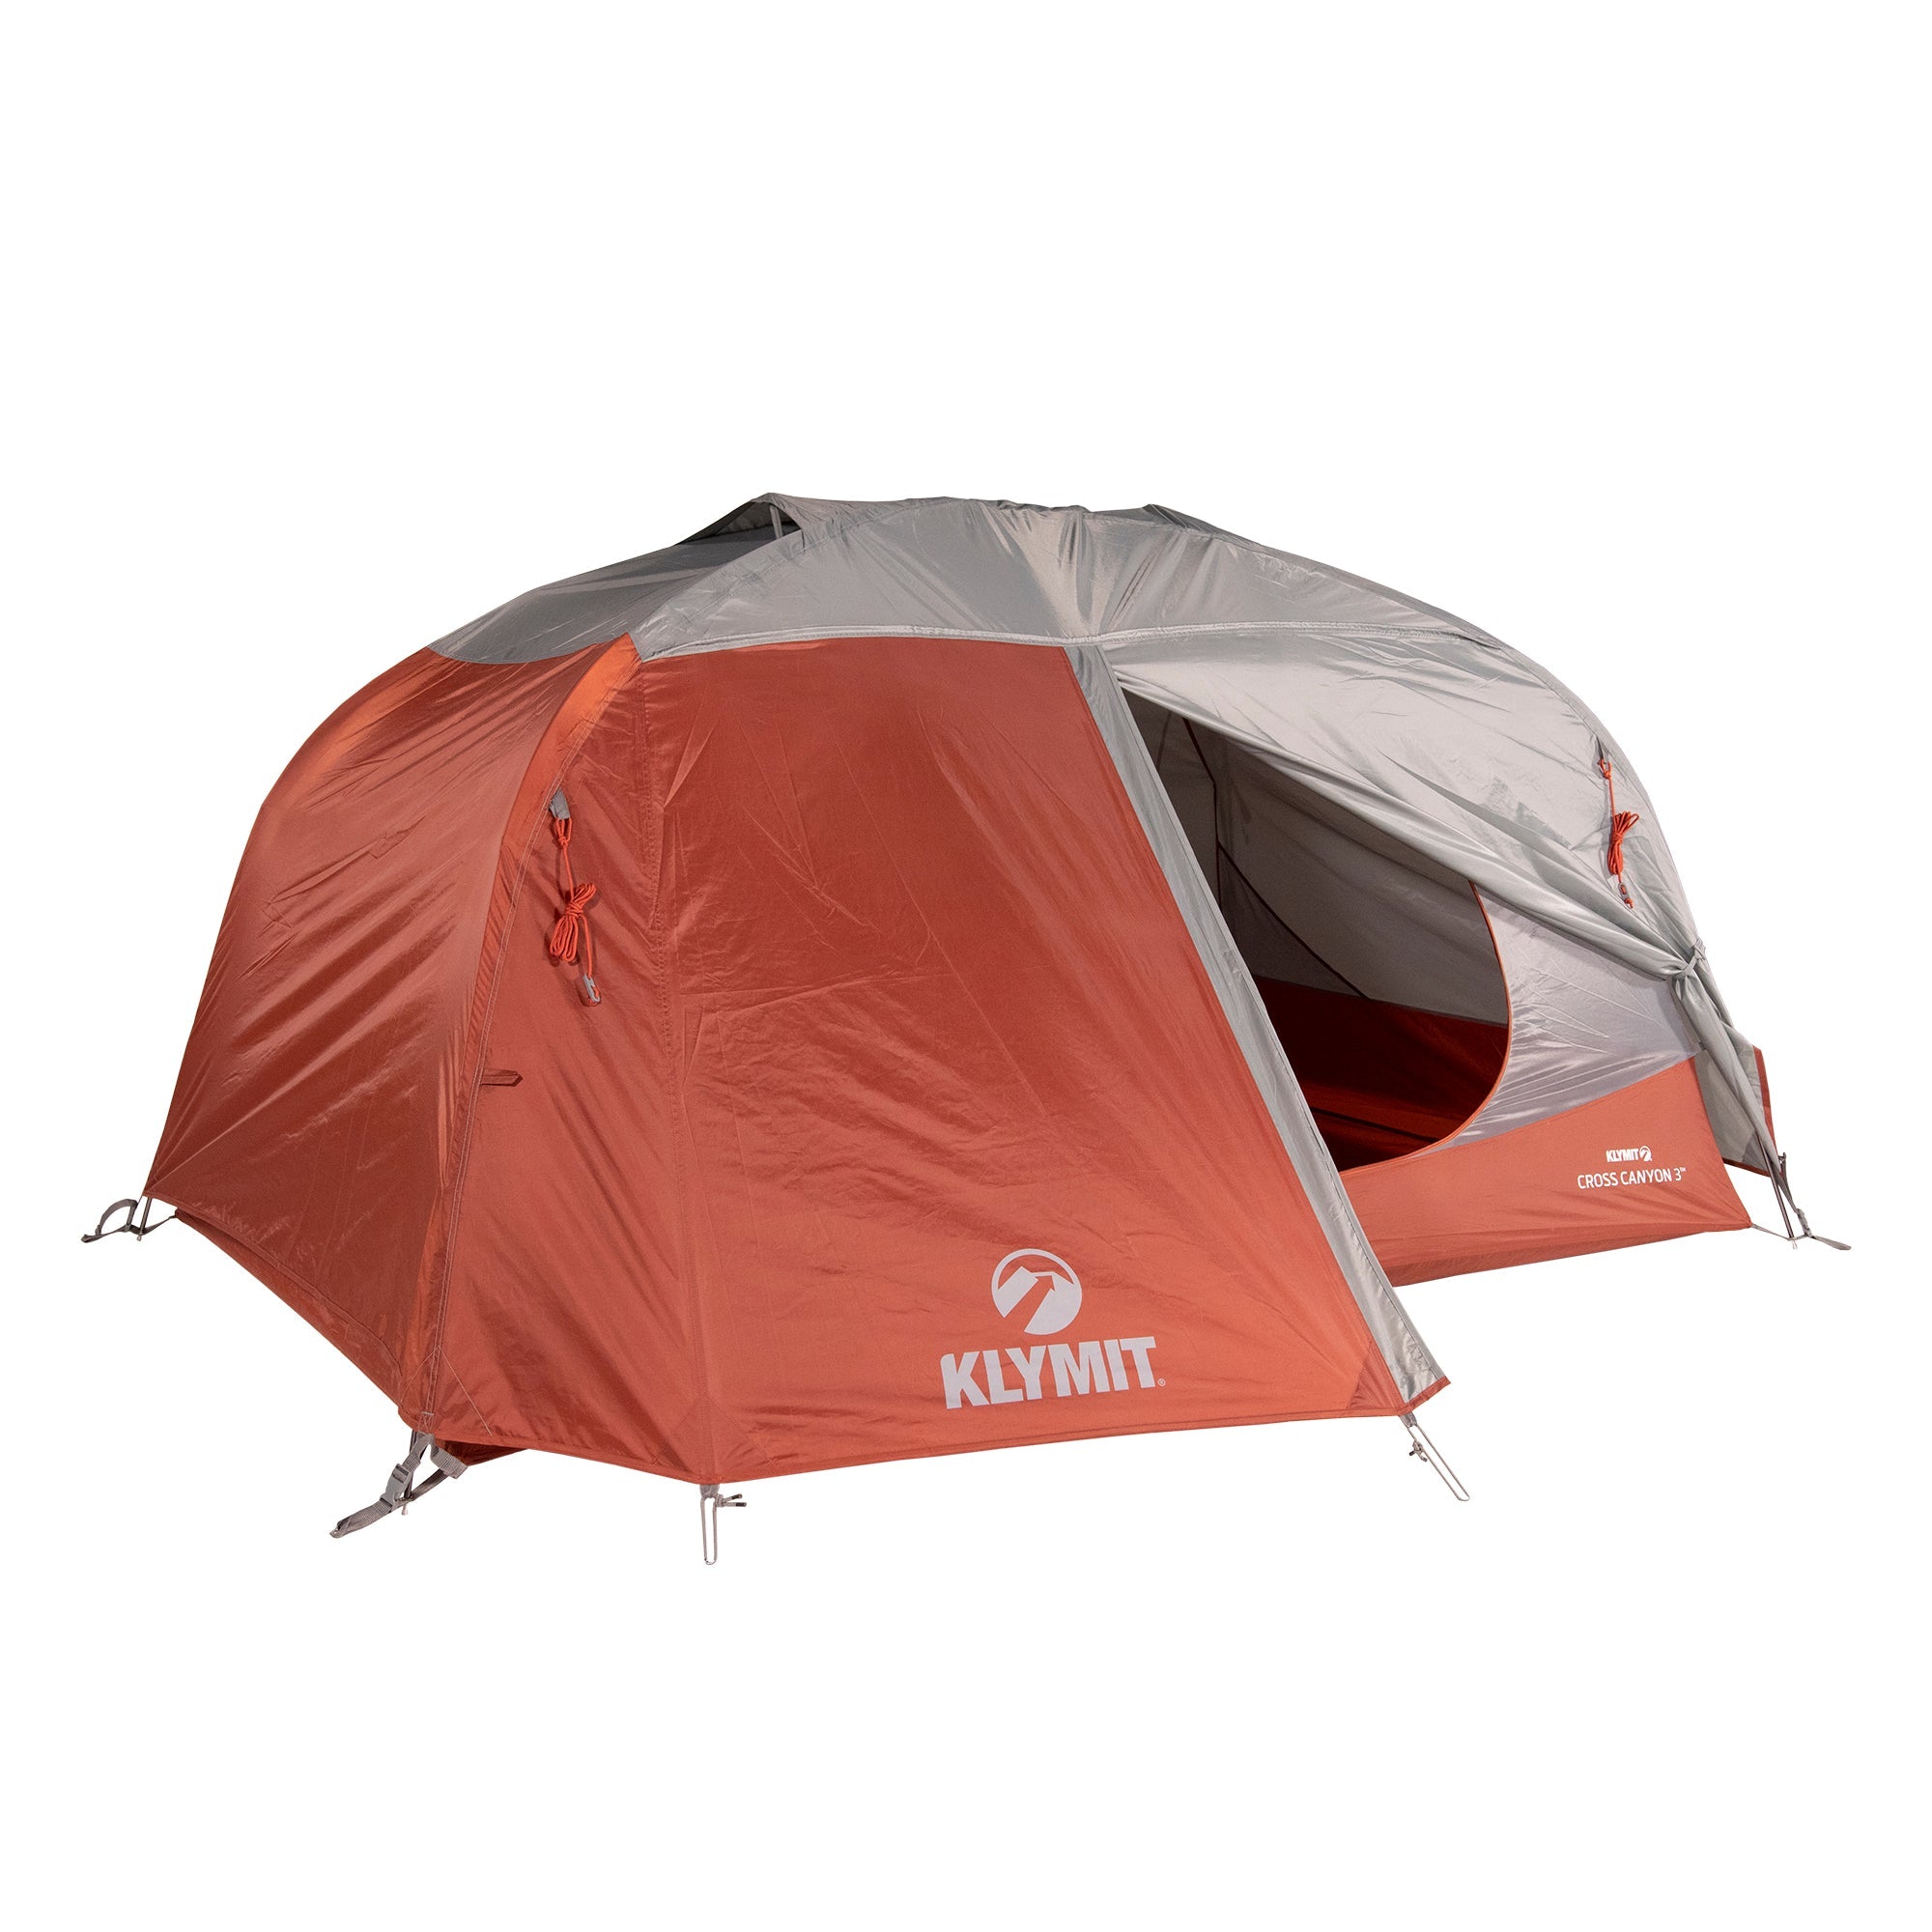 Cross Canyon Tent, Red and Gray, Angled Open